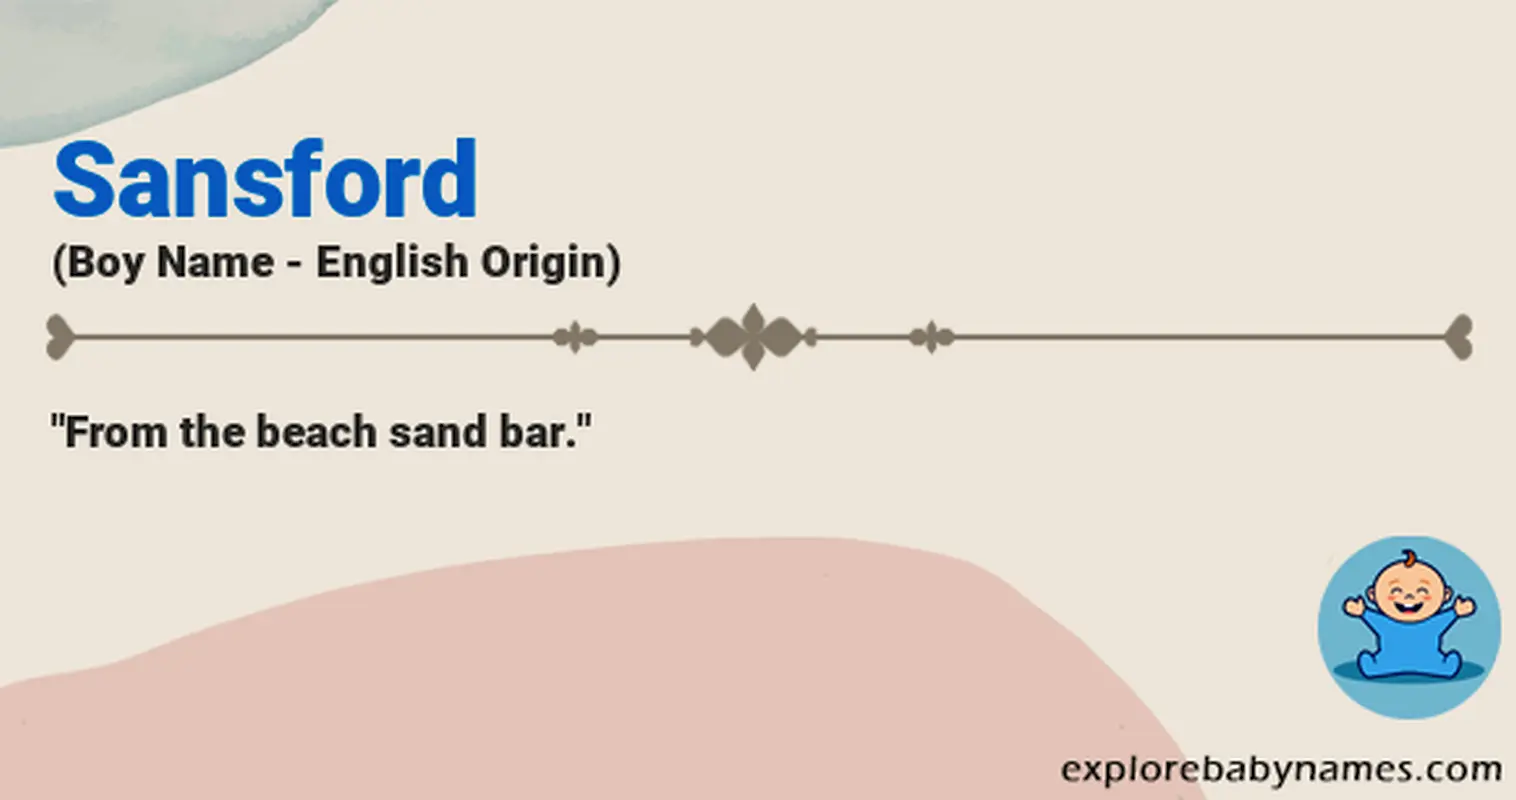 Meaning of Sansford